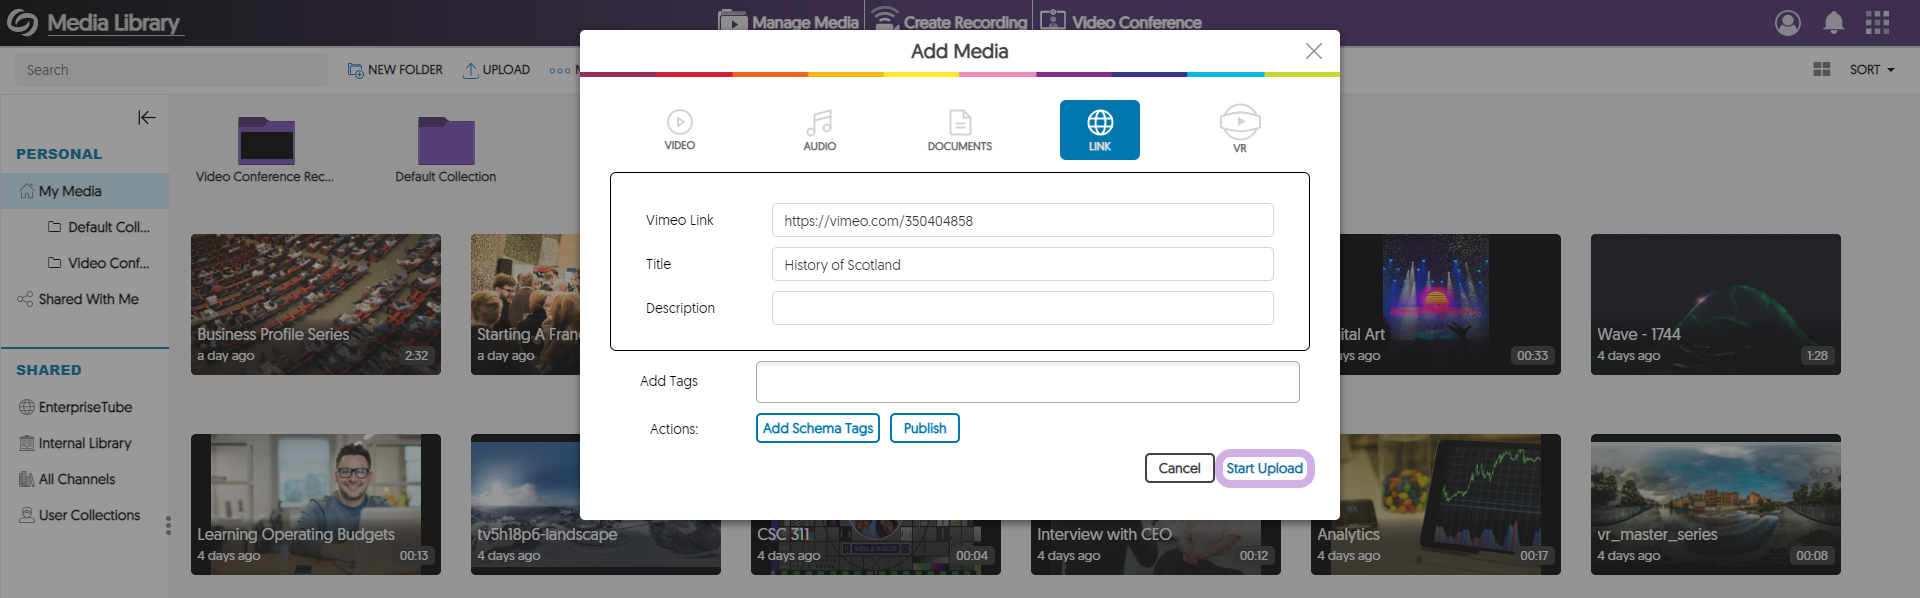 Add Media panel with Start Upload highlighted.